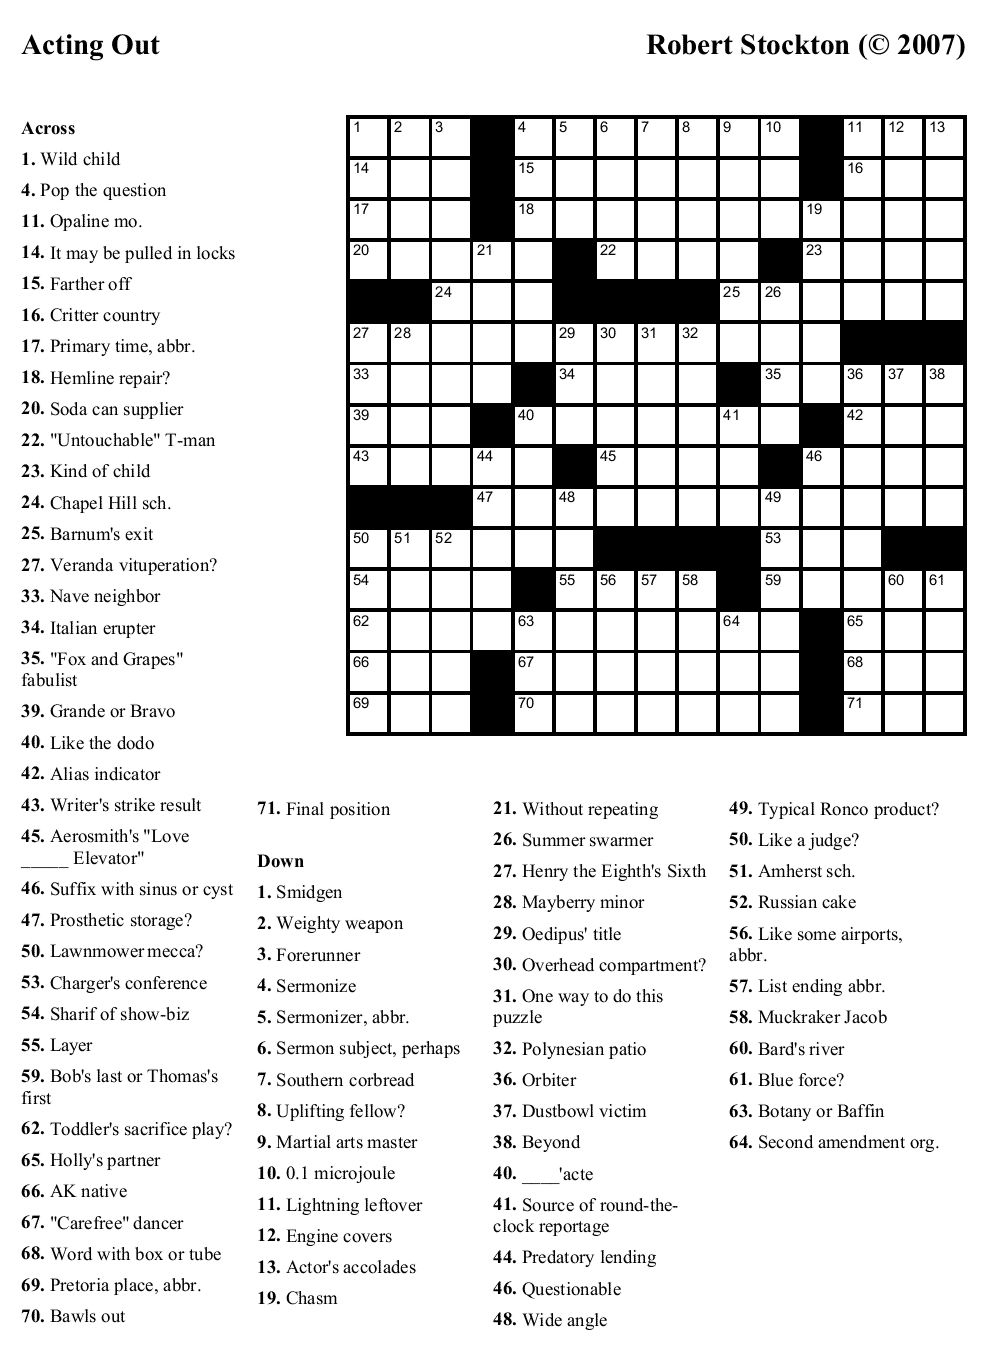 Printable Crossword Puzzles Get Yourself Some Easy Crossword Puzzles Printa Printable Crossword Puzzles Free Printable Crossword Puzzles Crossword Puzzles - Free Online Printable Easy Crossword Puzzles